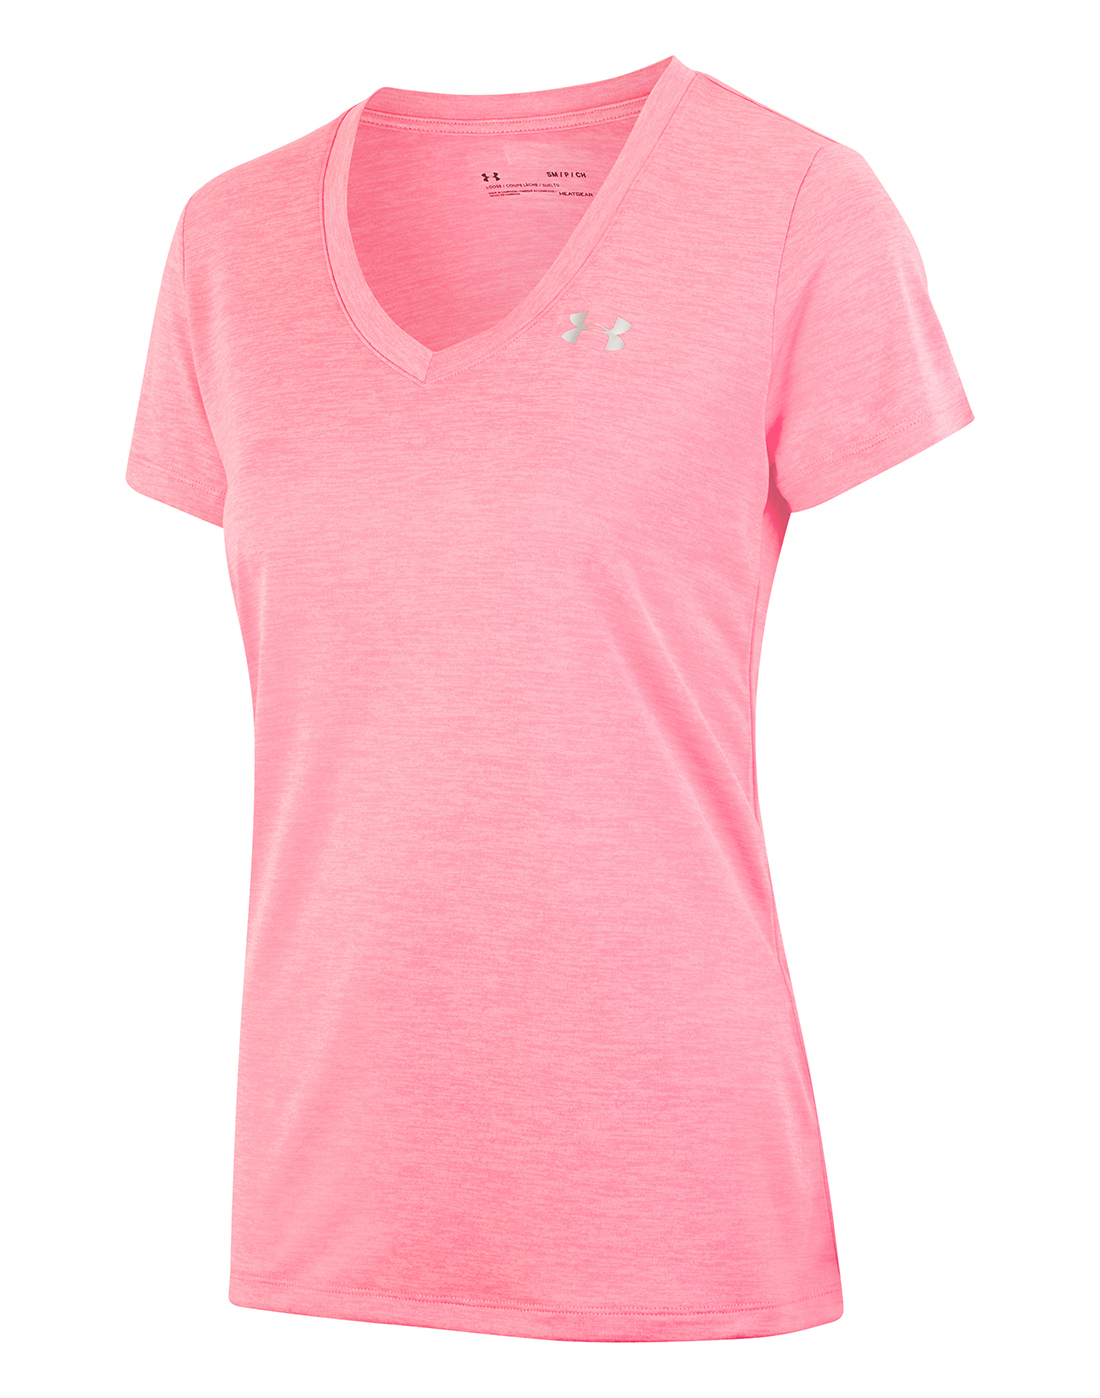 Under Armour Womens Tech T-shirt - Pink | Life Style Sports IE